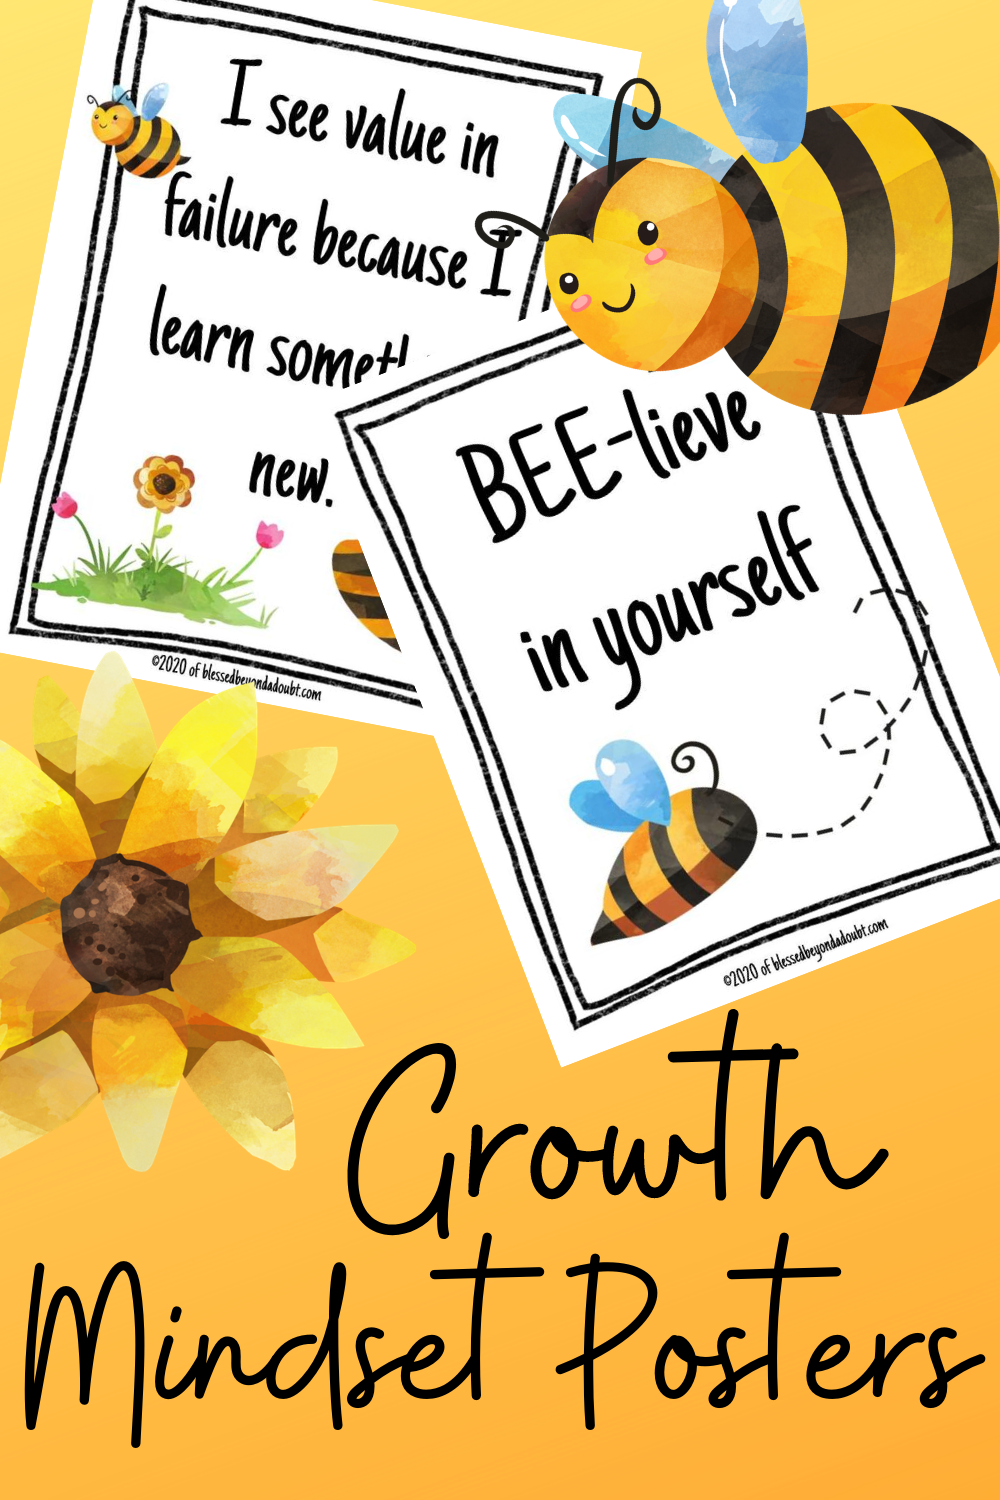 Here are 2 sets of FREE Growth Mindset Posters for classroom. There are over 20 different encouraging quotes. Pick and choose which ones work in your classroom. #growthmindset #growthmindsetquotes #growthmindsetactivities #growthmindsetbulletinboard #growthmindset bulletinboardfree#growthmindsetquotes #growthmindsetquotesforkids #growthmindsetquotesforkidsposter #growthmindsetbulletinboard